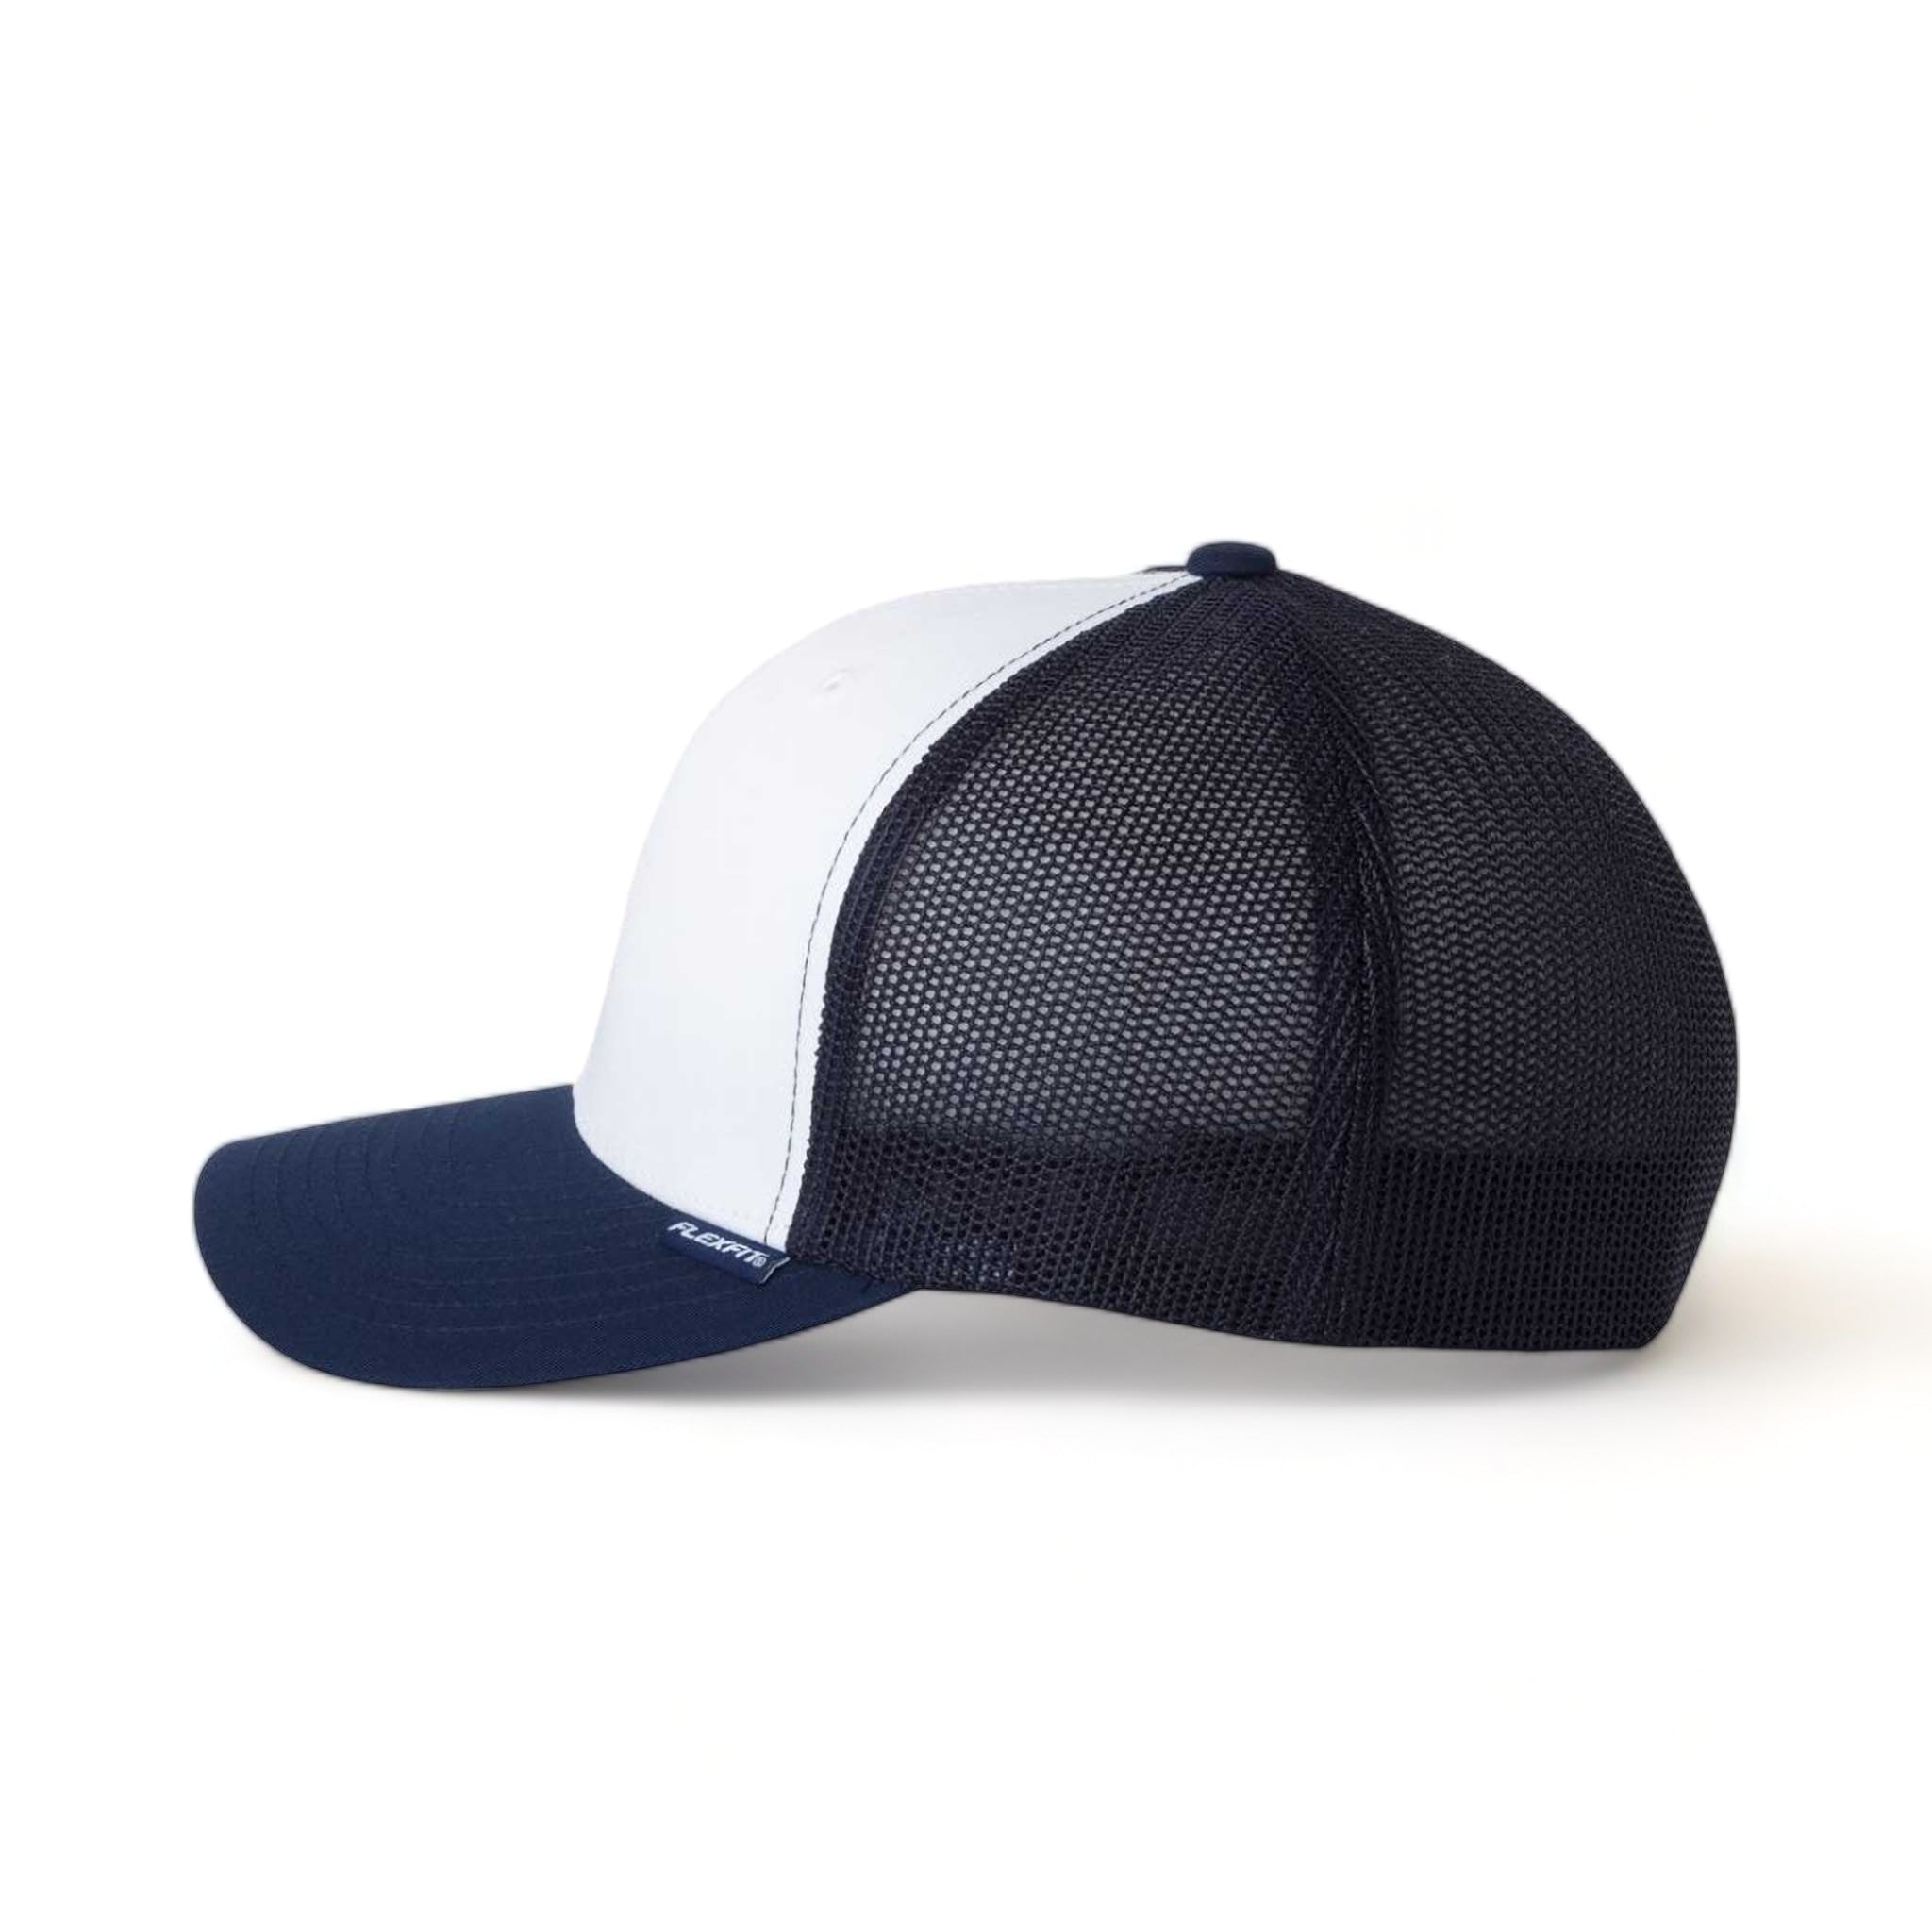 Side view of Flexfit 6511 custom hat in navy, white and navy